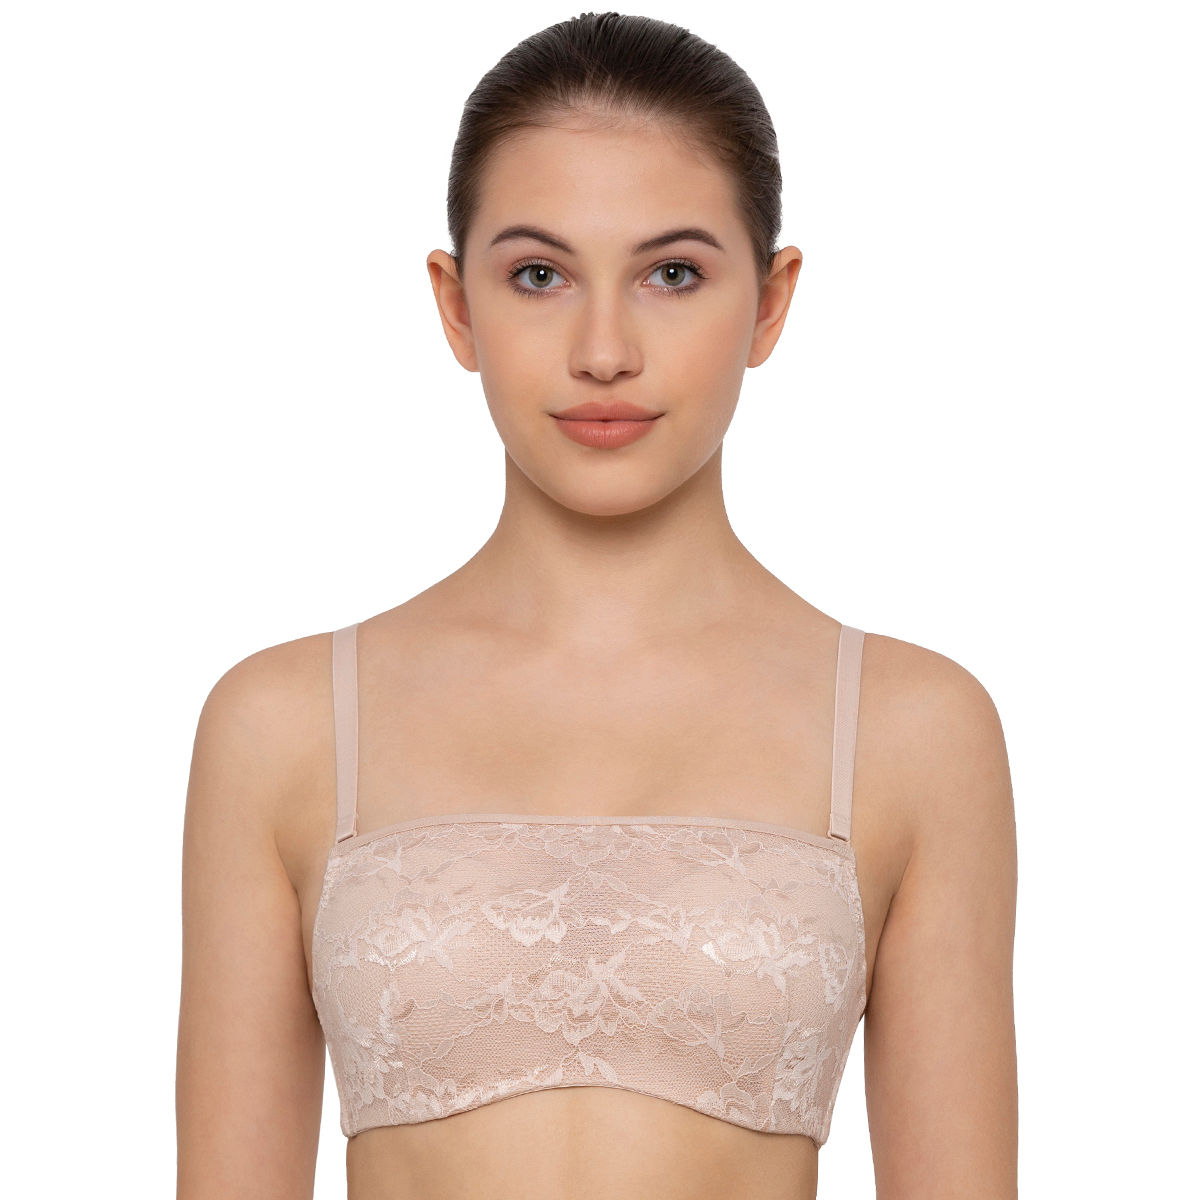 Buy Triumph Padded Wired New Lace Bandeau Tube Bra - Black online